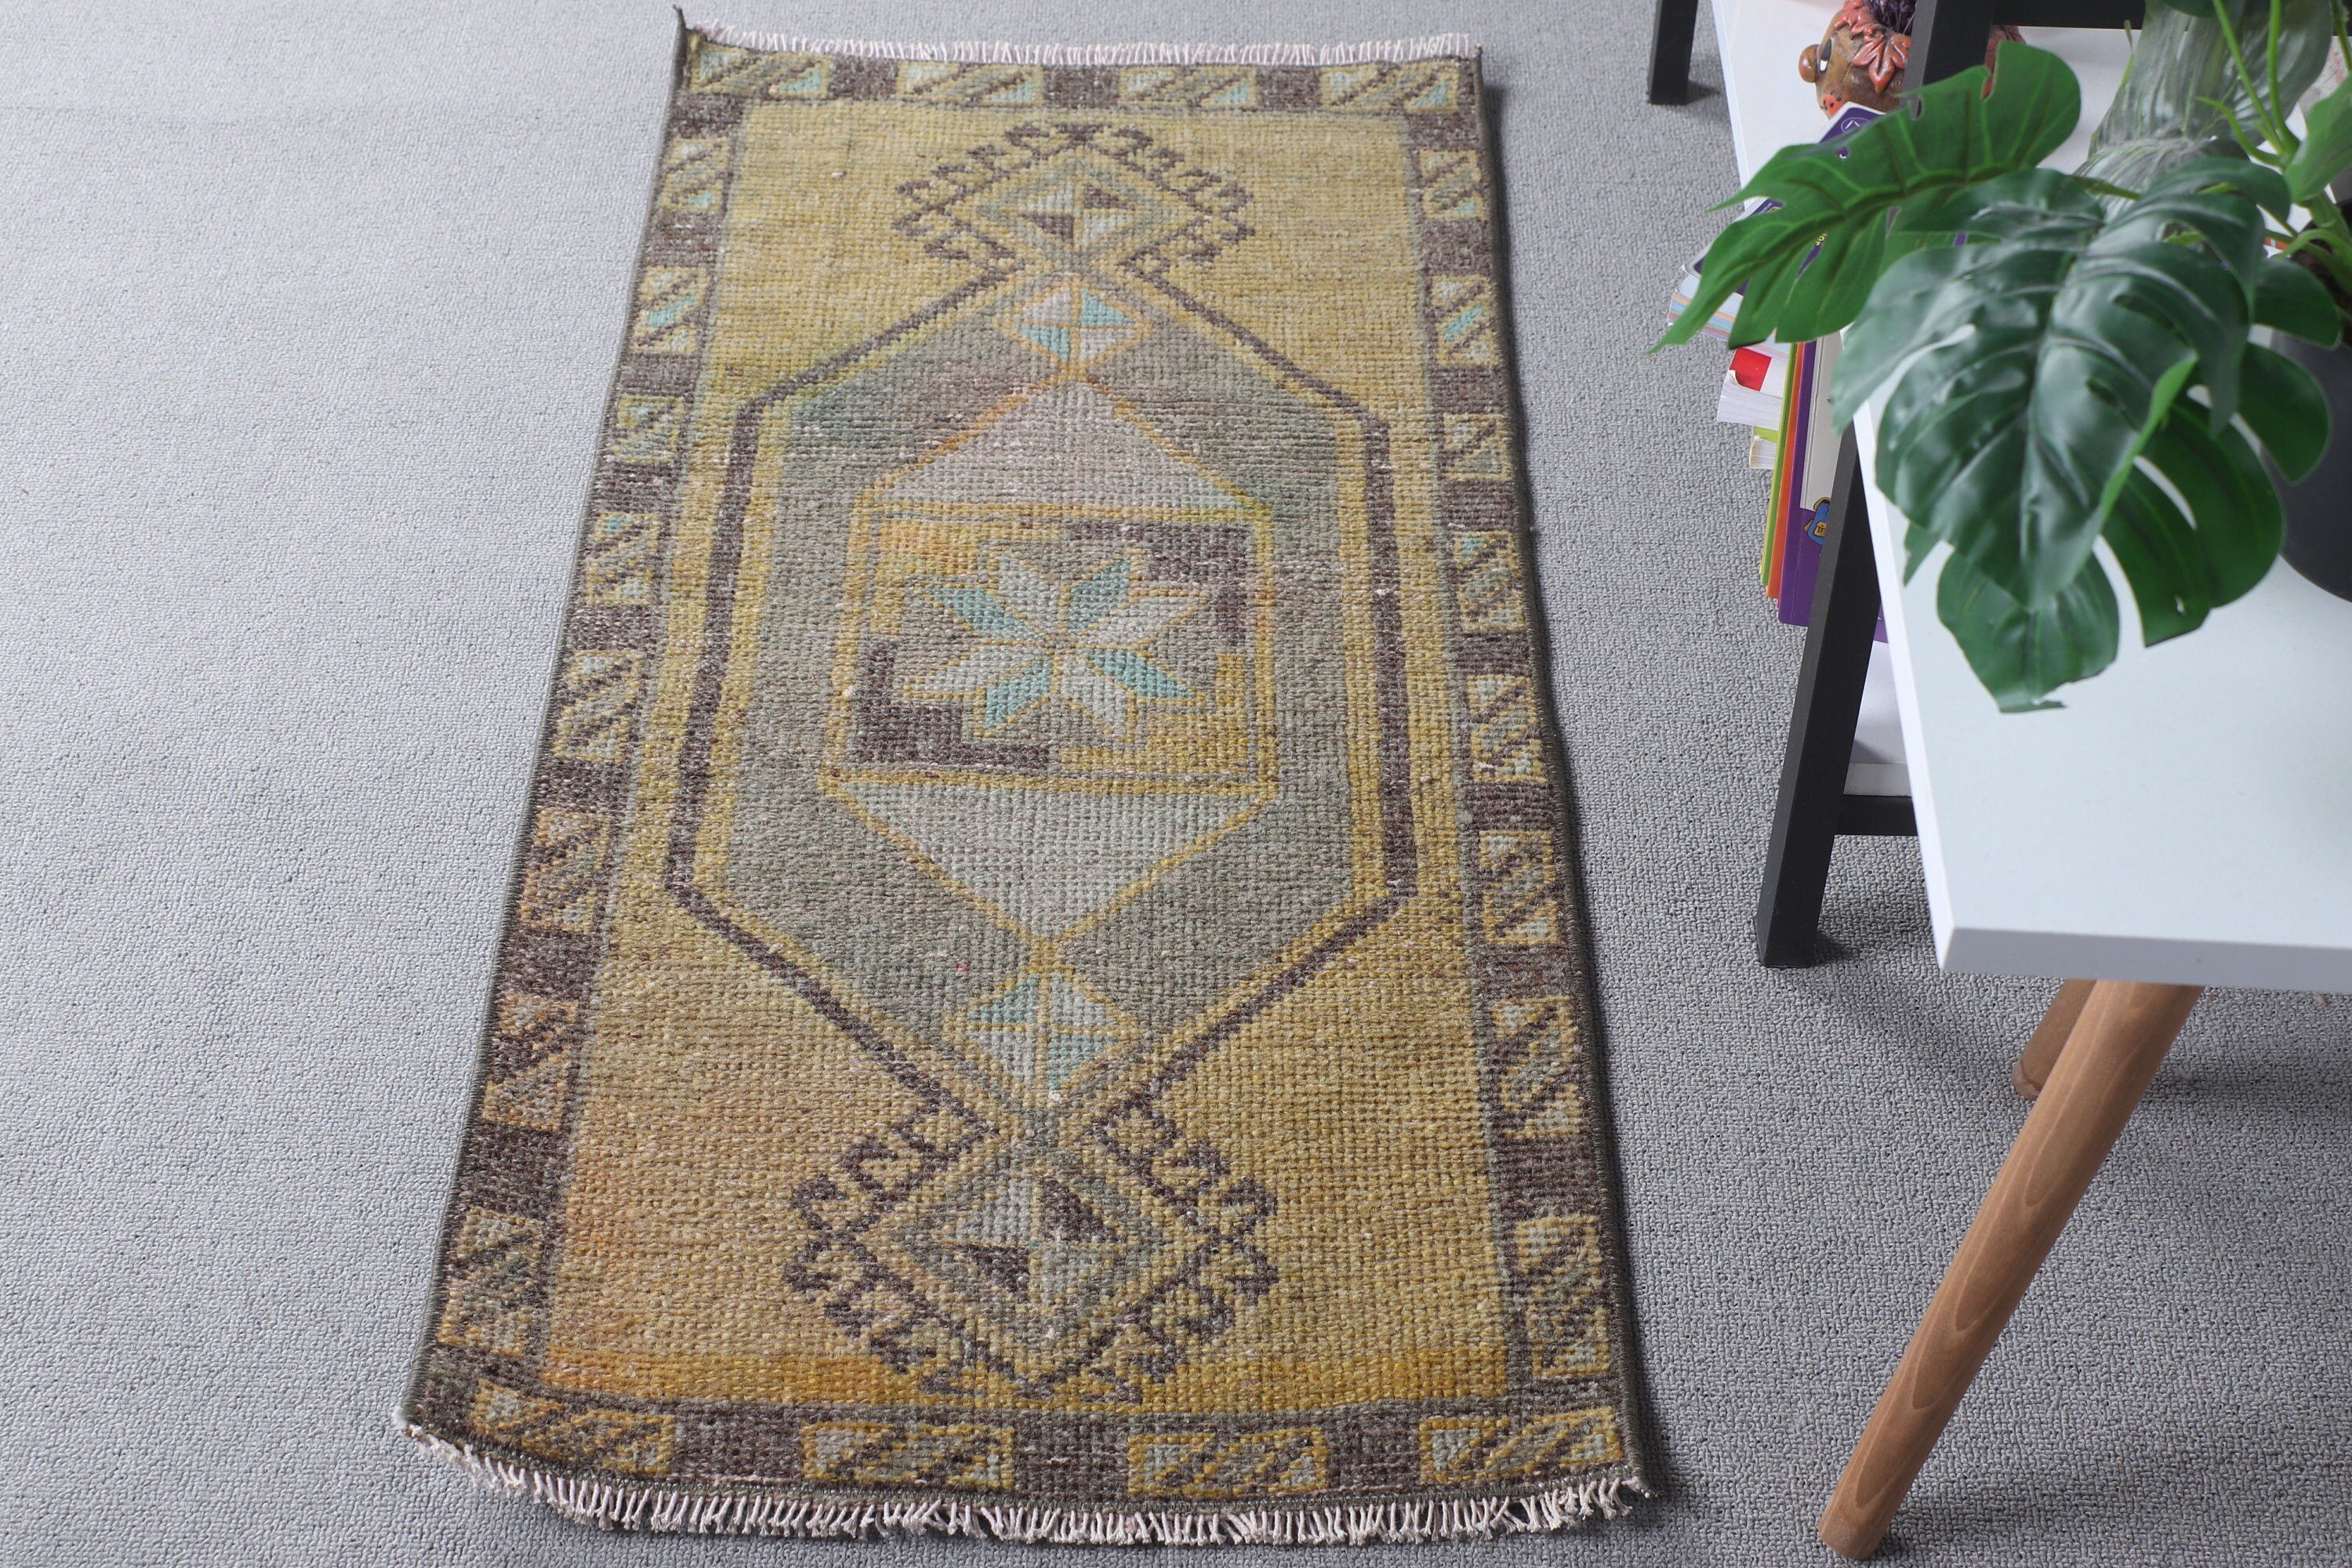 Bright Rug, Bathroom Rugs, Brown Kitchen Rug, Anatolian Rugs, Entry Rug, Turkish Rug, 1.5x3.3 ft Small Rug, Kitchen Rugs, Vintage Rugs